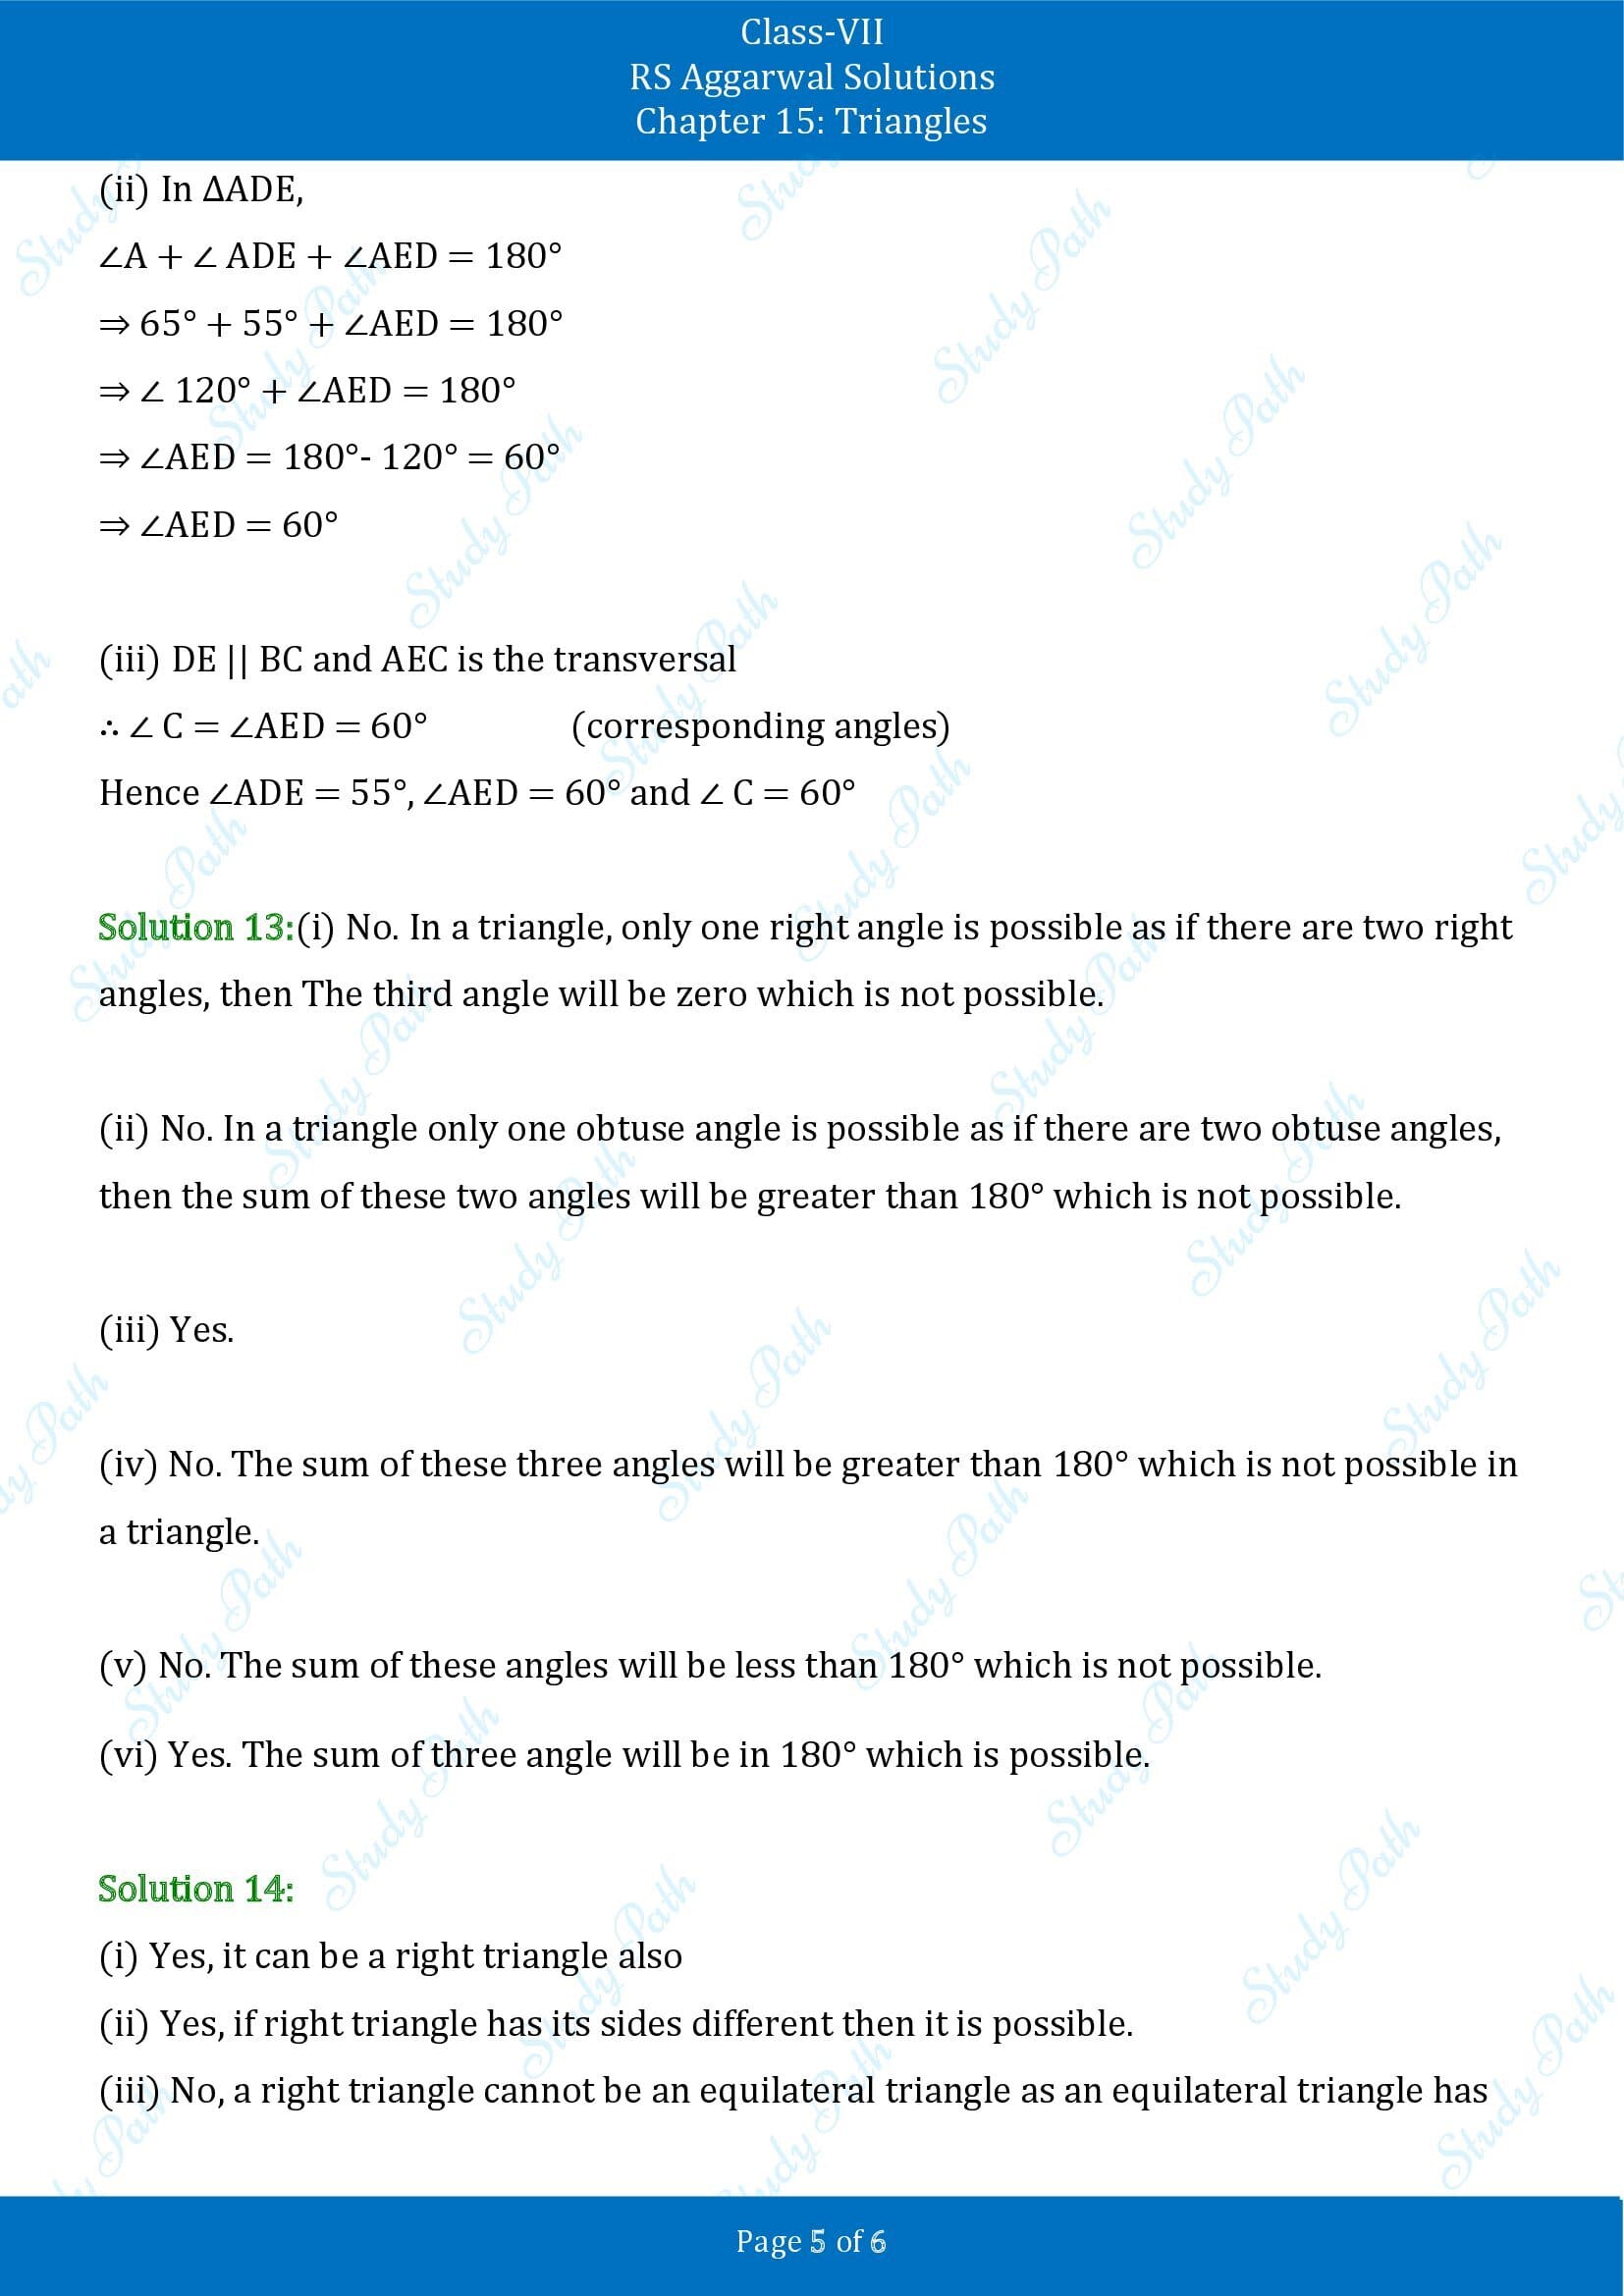 RS Aggarwal Solutions Class 7 Chapter 15 Triangles Exercise 15A 00005